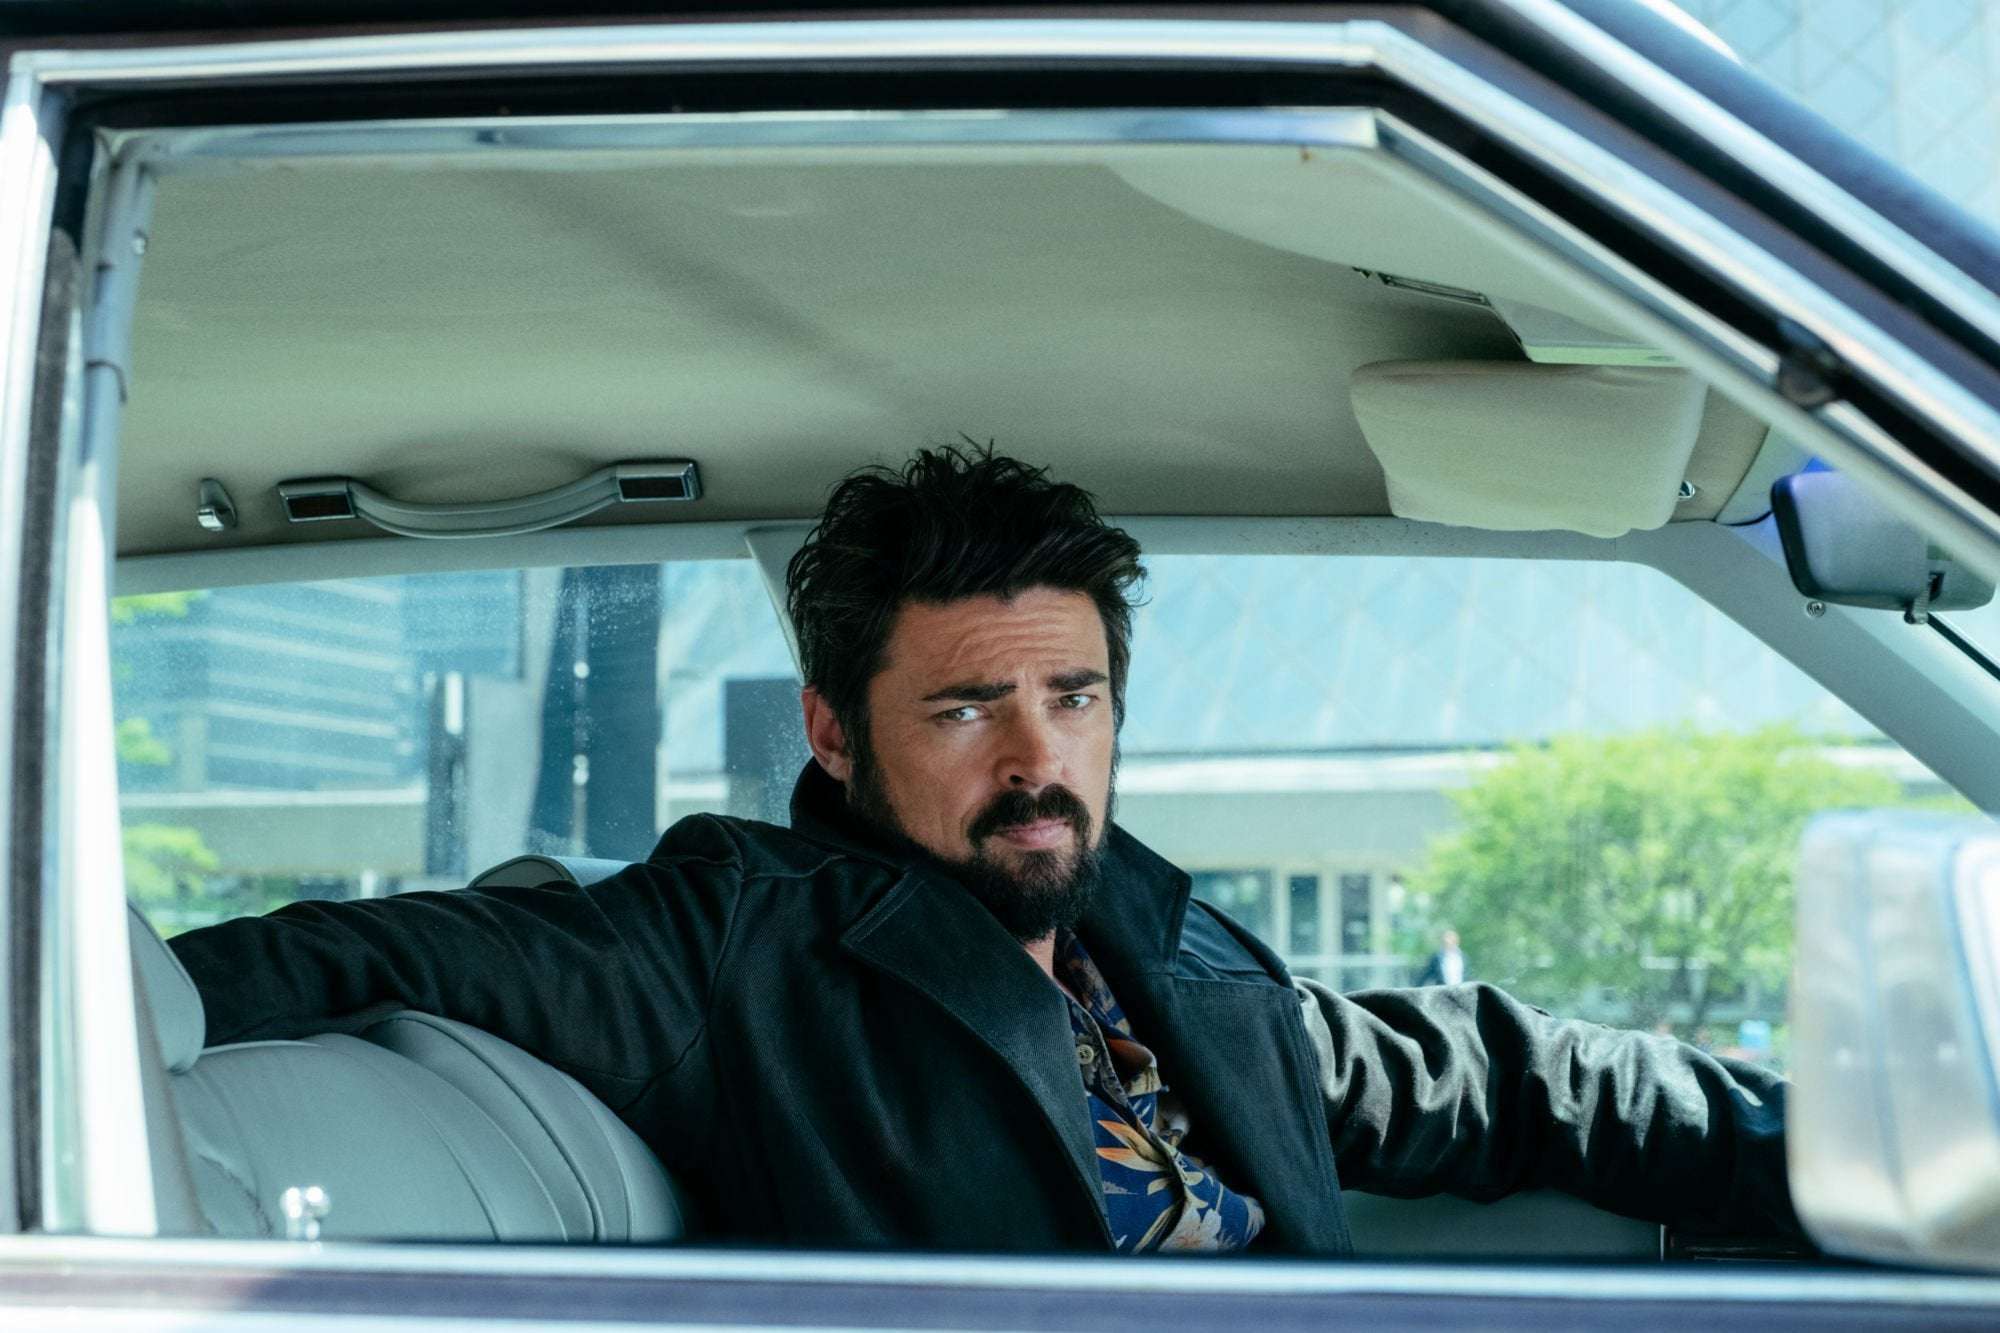 image for "The Boys" Season 2: Karl Urban Signals Filming Wrap; "Mid 2020" Debut